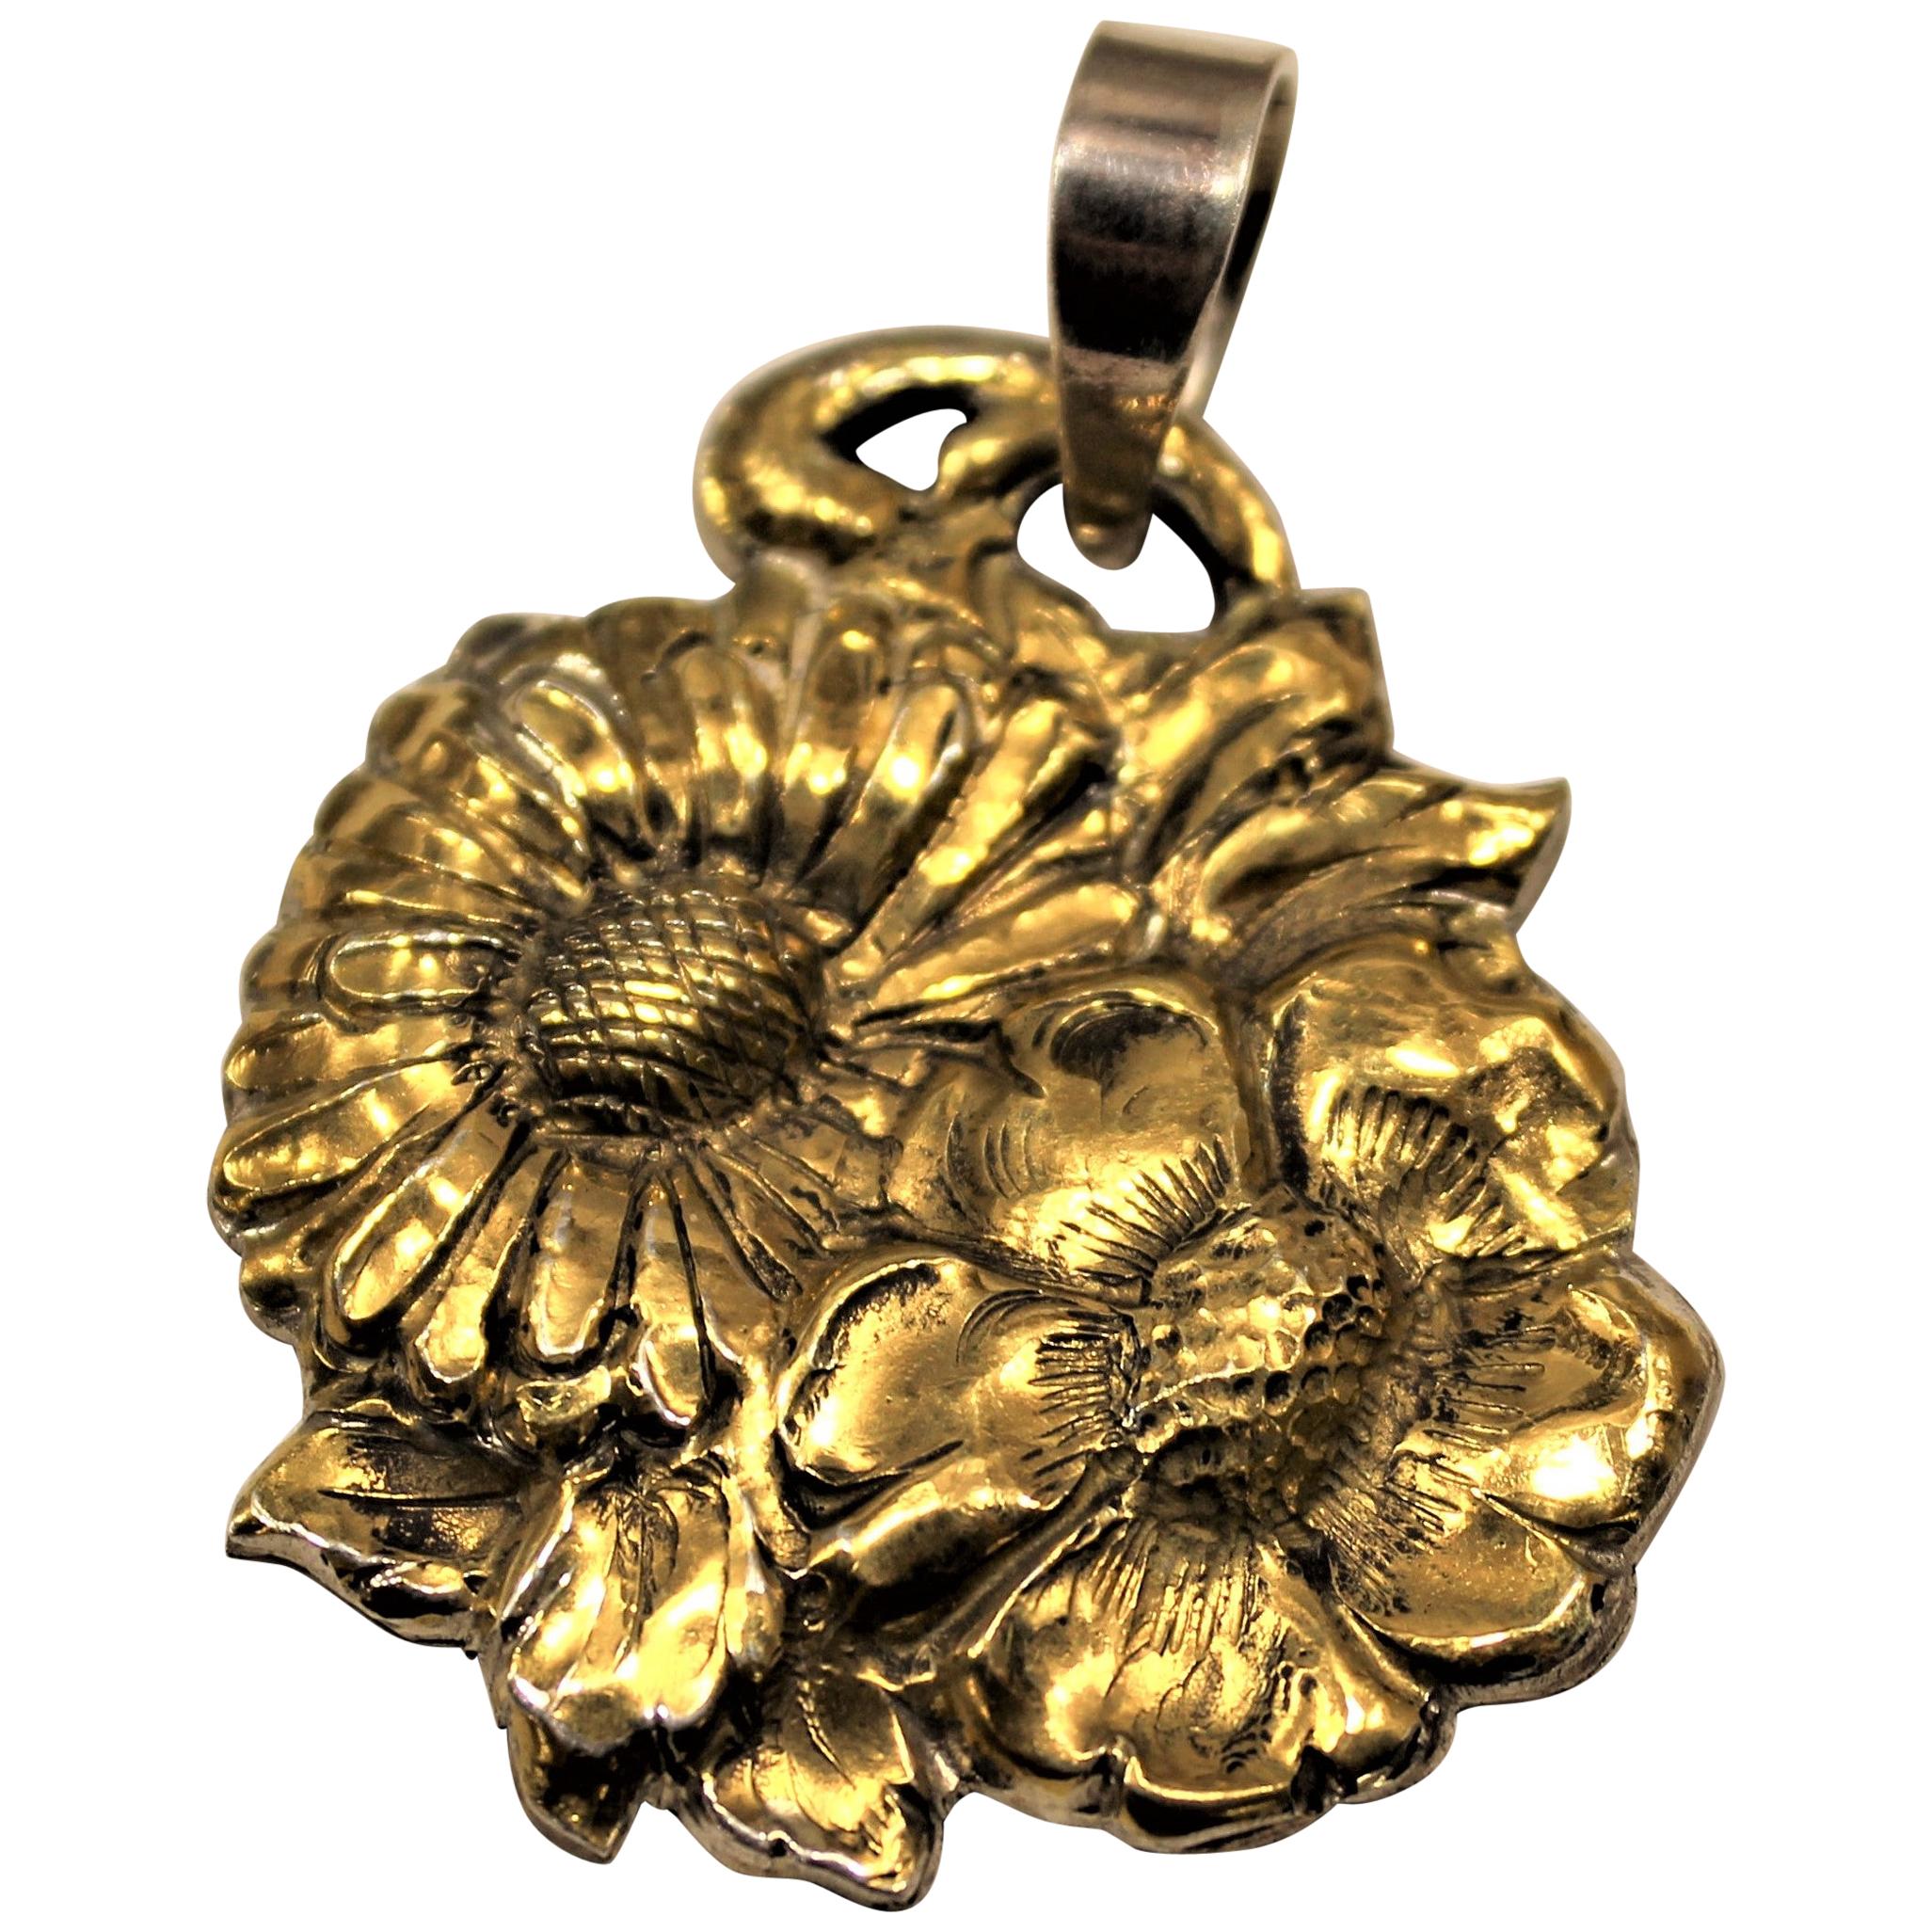 24 Karat Gold, Solid Silver, Pendant, Daisy, Handcrafted, Italy